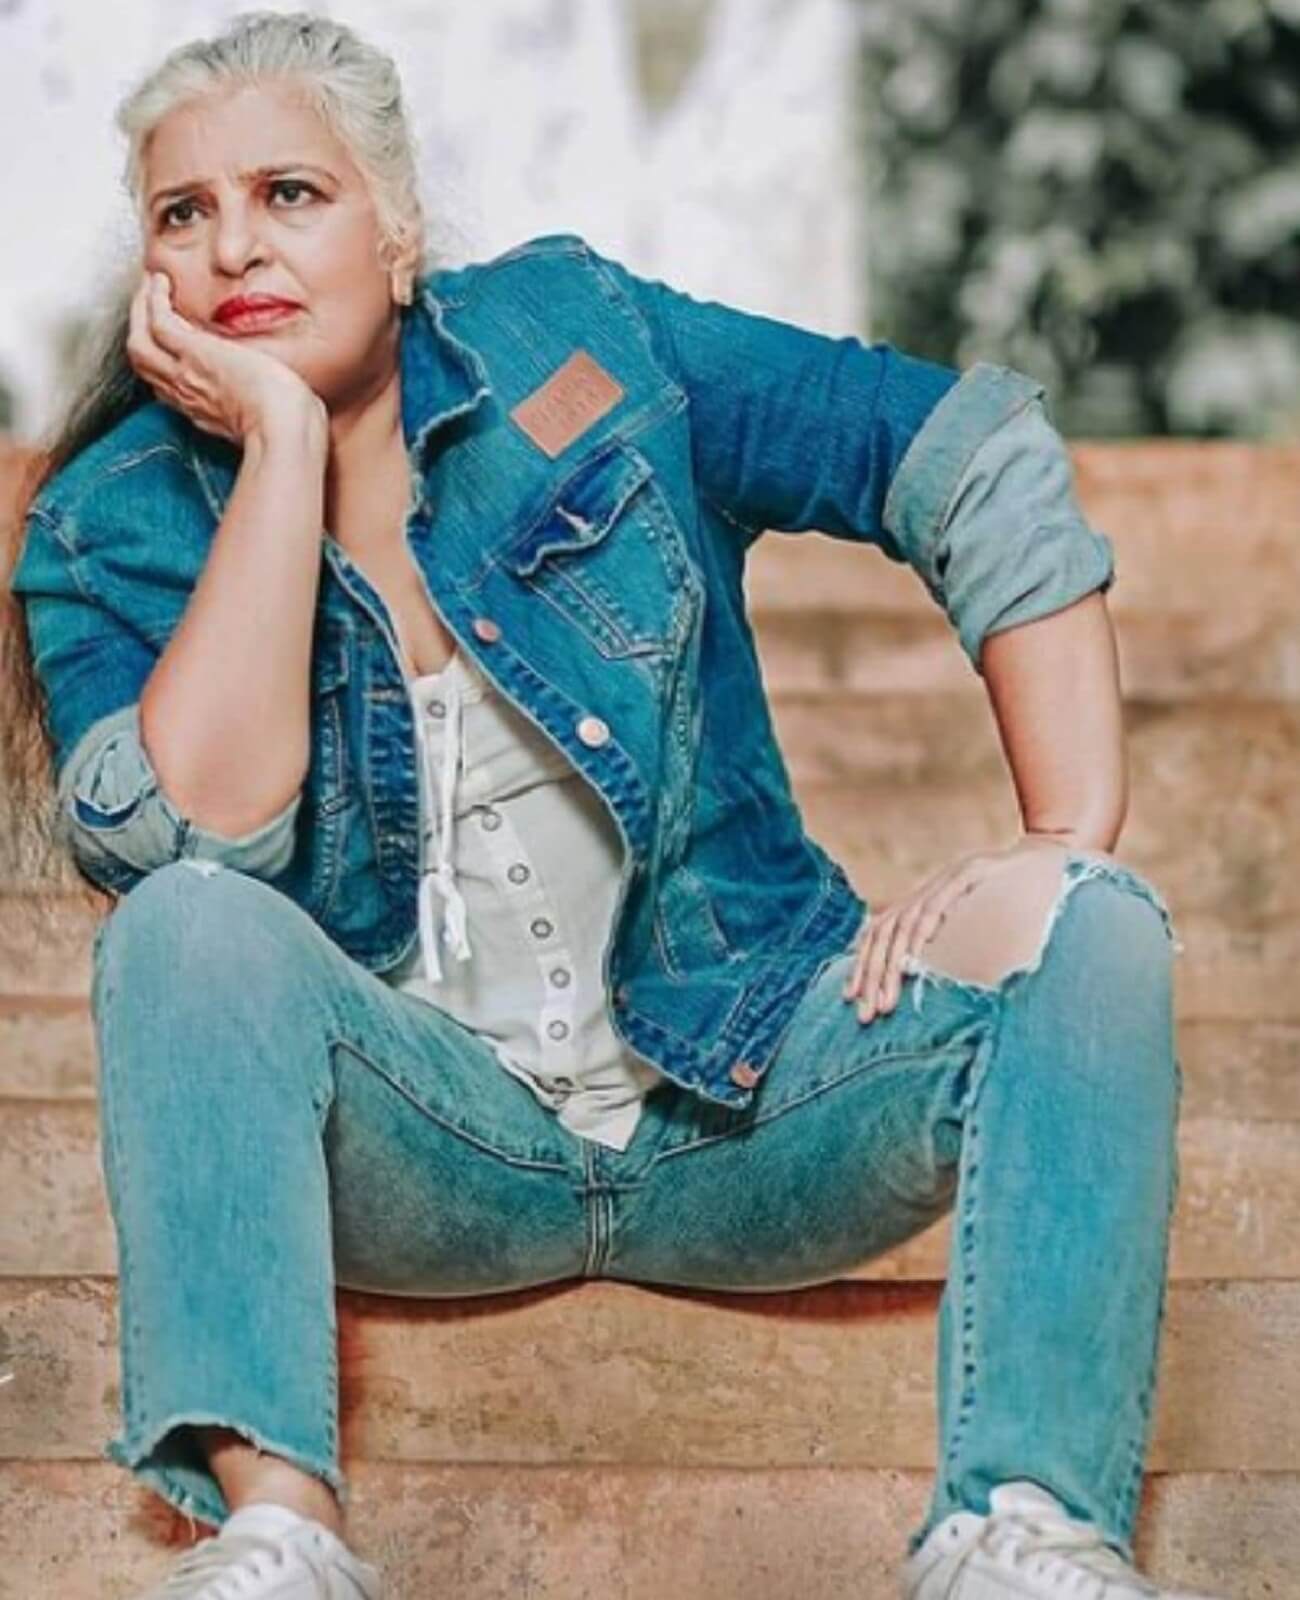 69-year-old actress Rajni photoshoots in Tarn jeans, love with fans, some trolls